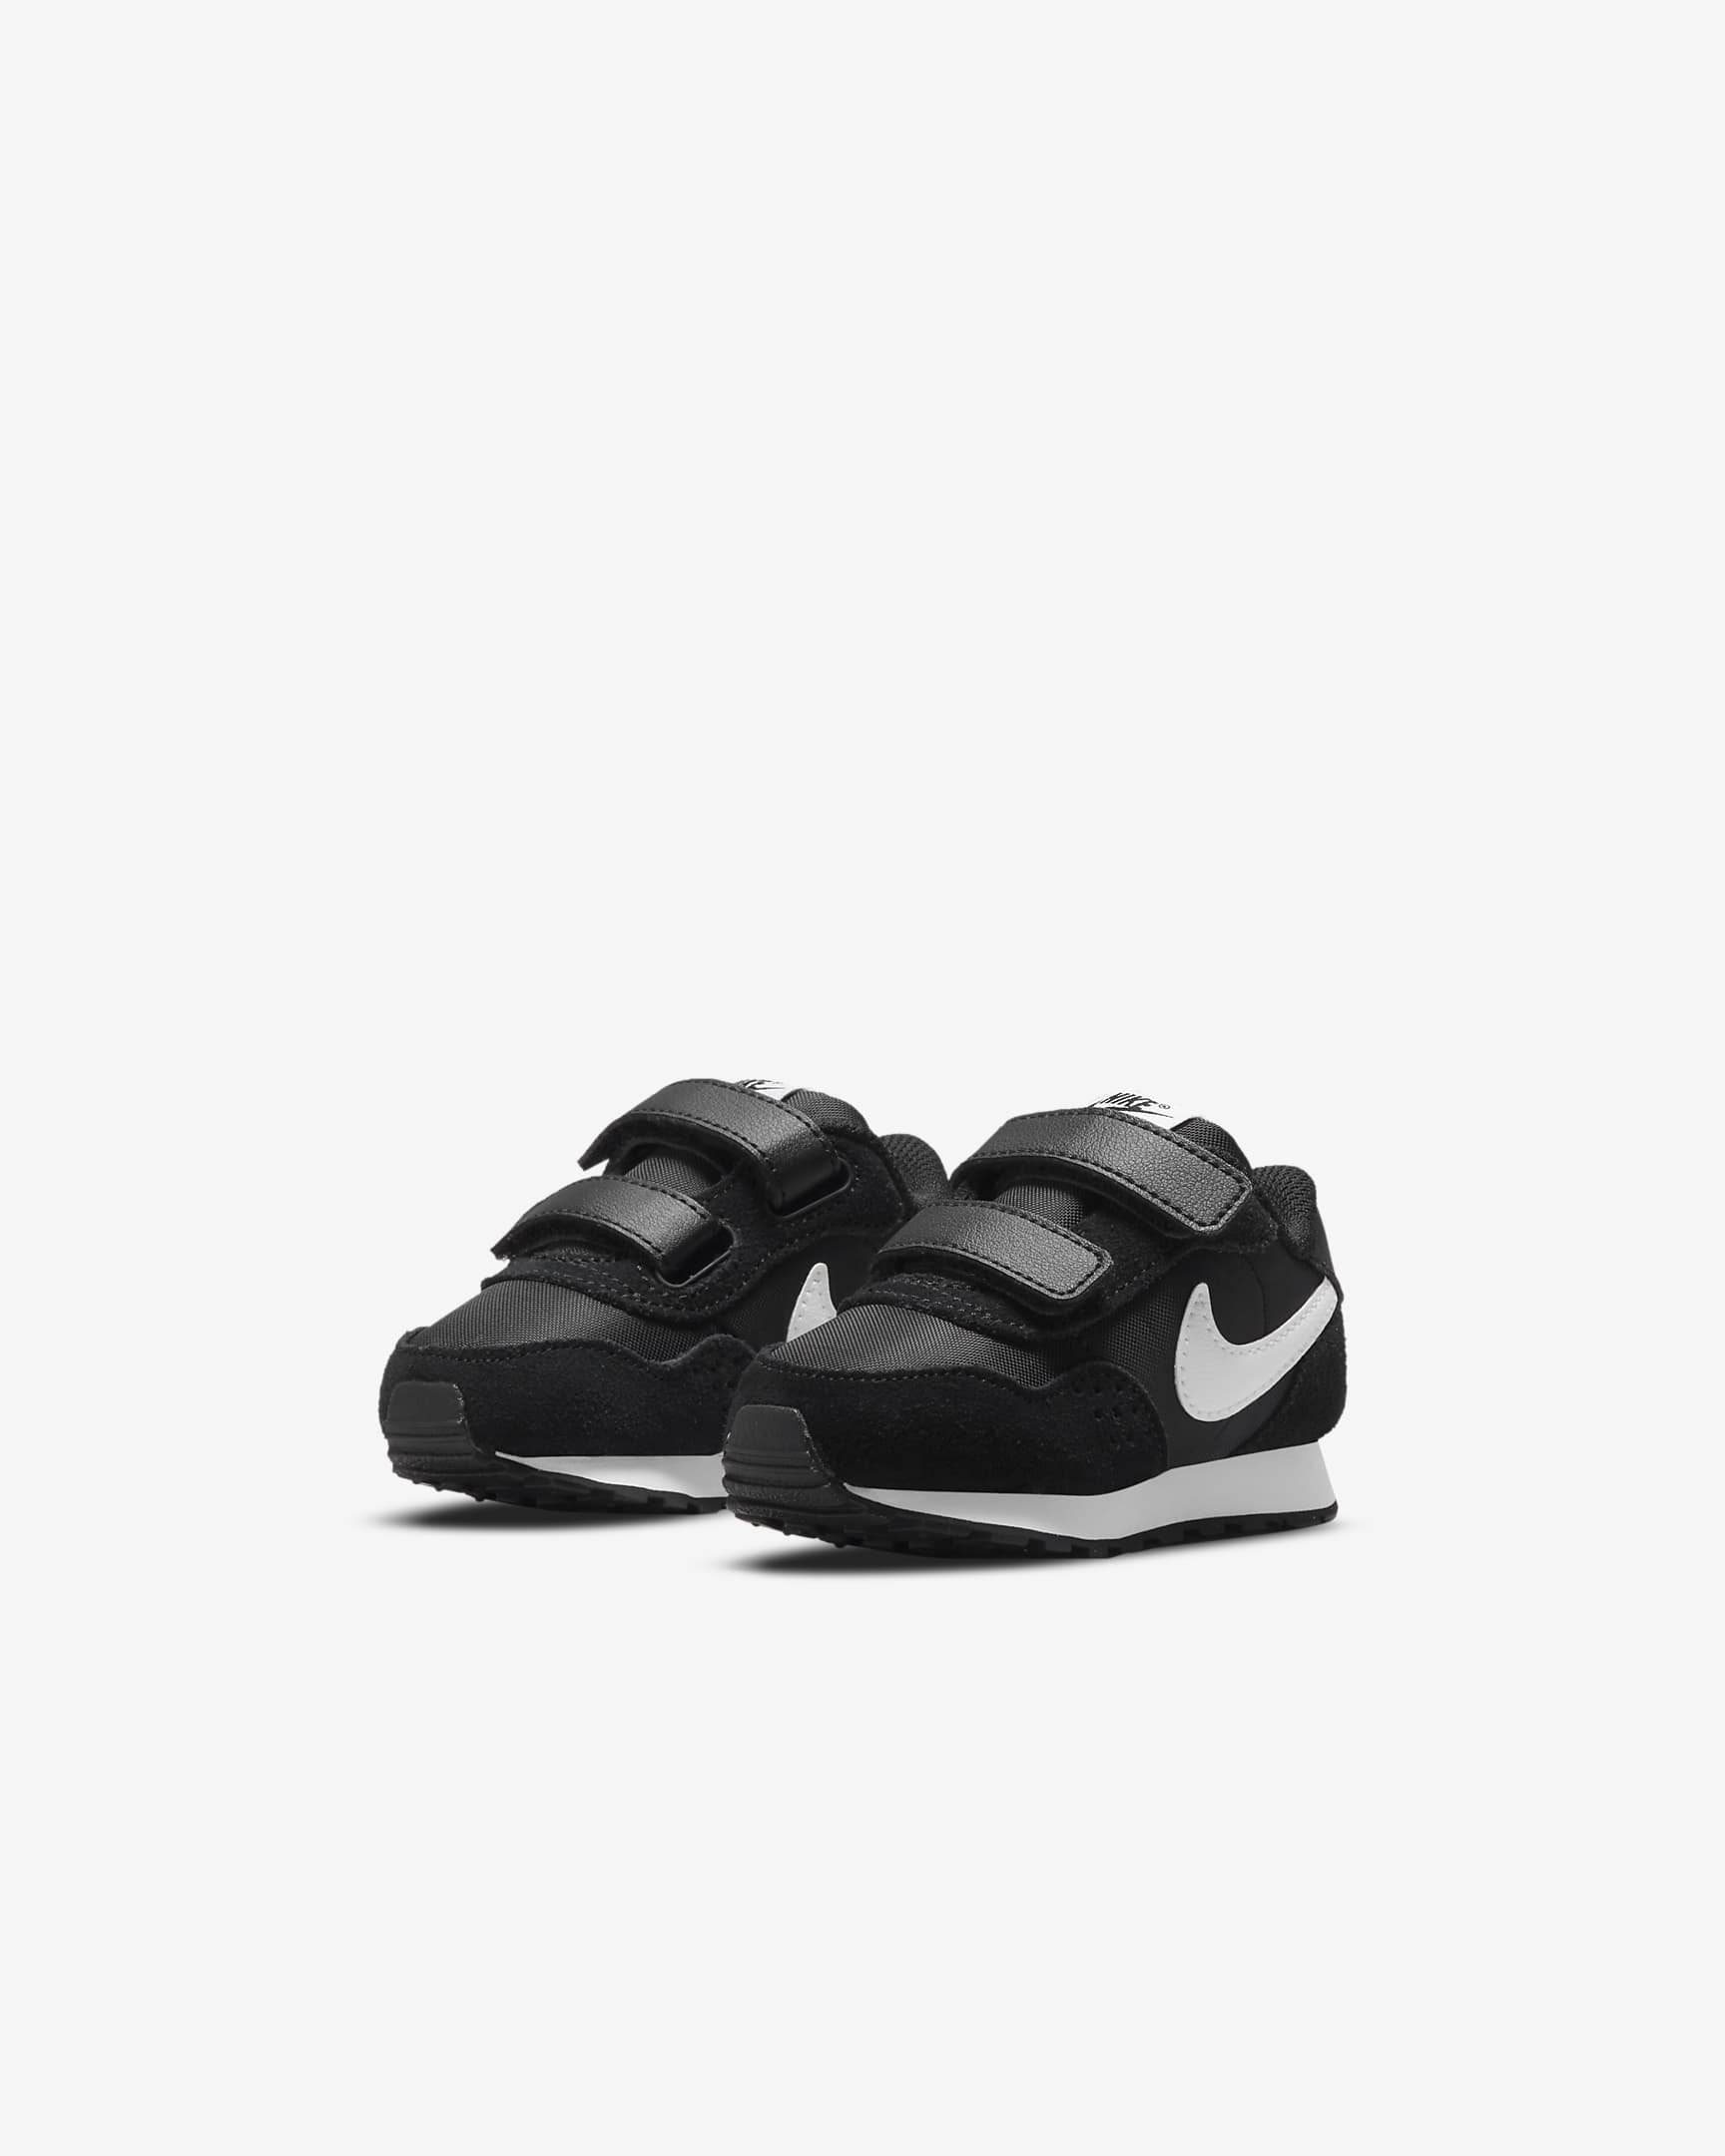 Nike MD Valiant Baby and Toddler Shoe - Black/White